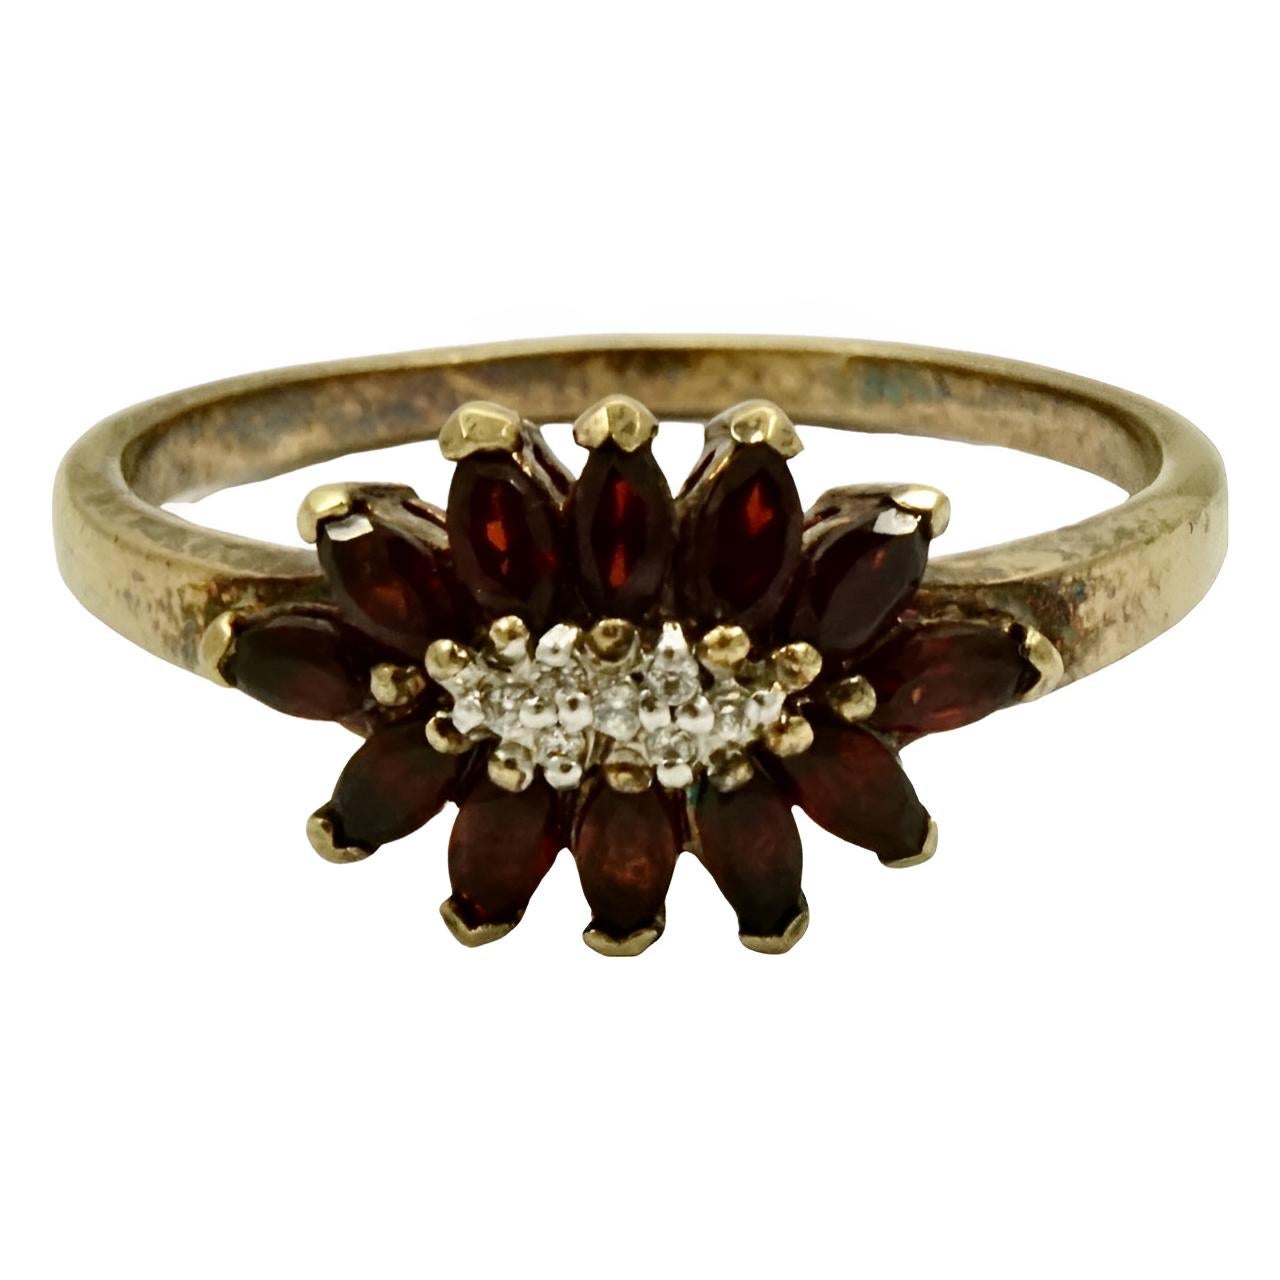 Lovely gold plated ring set with garnets, and a silver plated centre with a cluster of seven rhinestones. This is a large ring size UK V 1/2 / US 11, inside diameter 2.1 cm / .8 inch.

This is a beautiful and stylish ring that glints in the light.